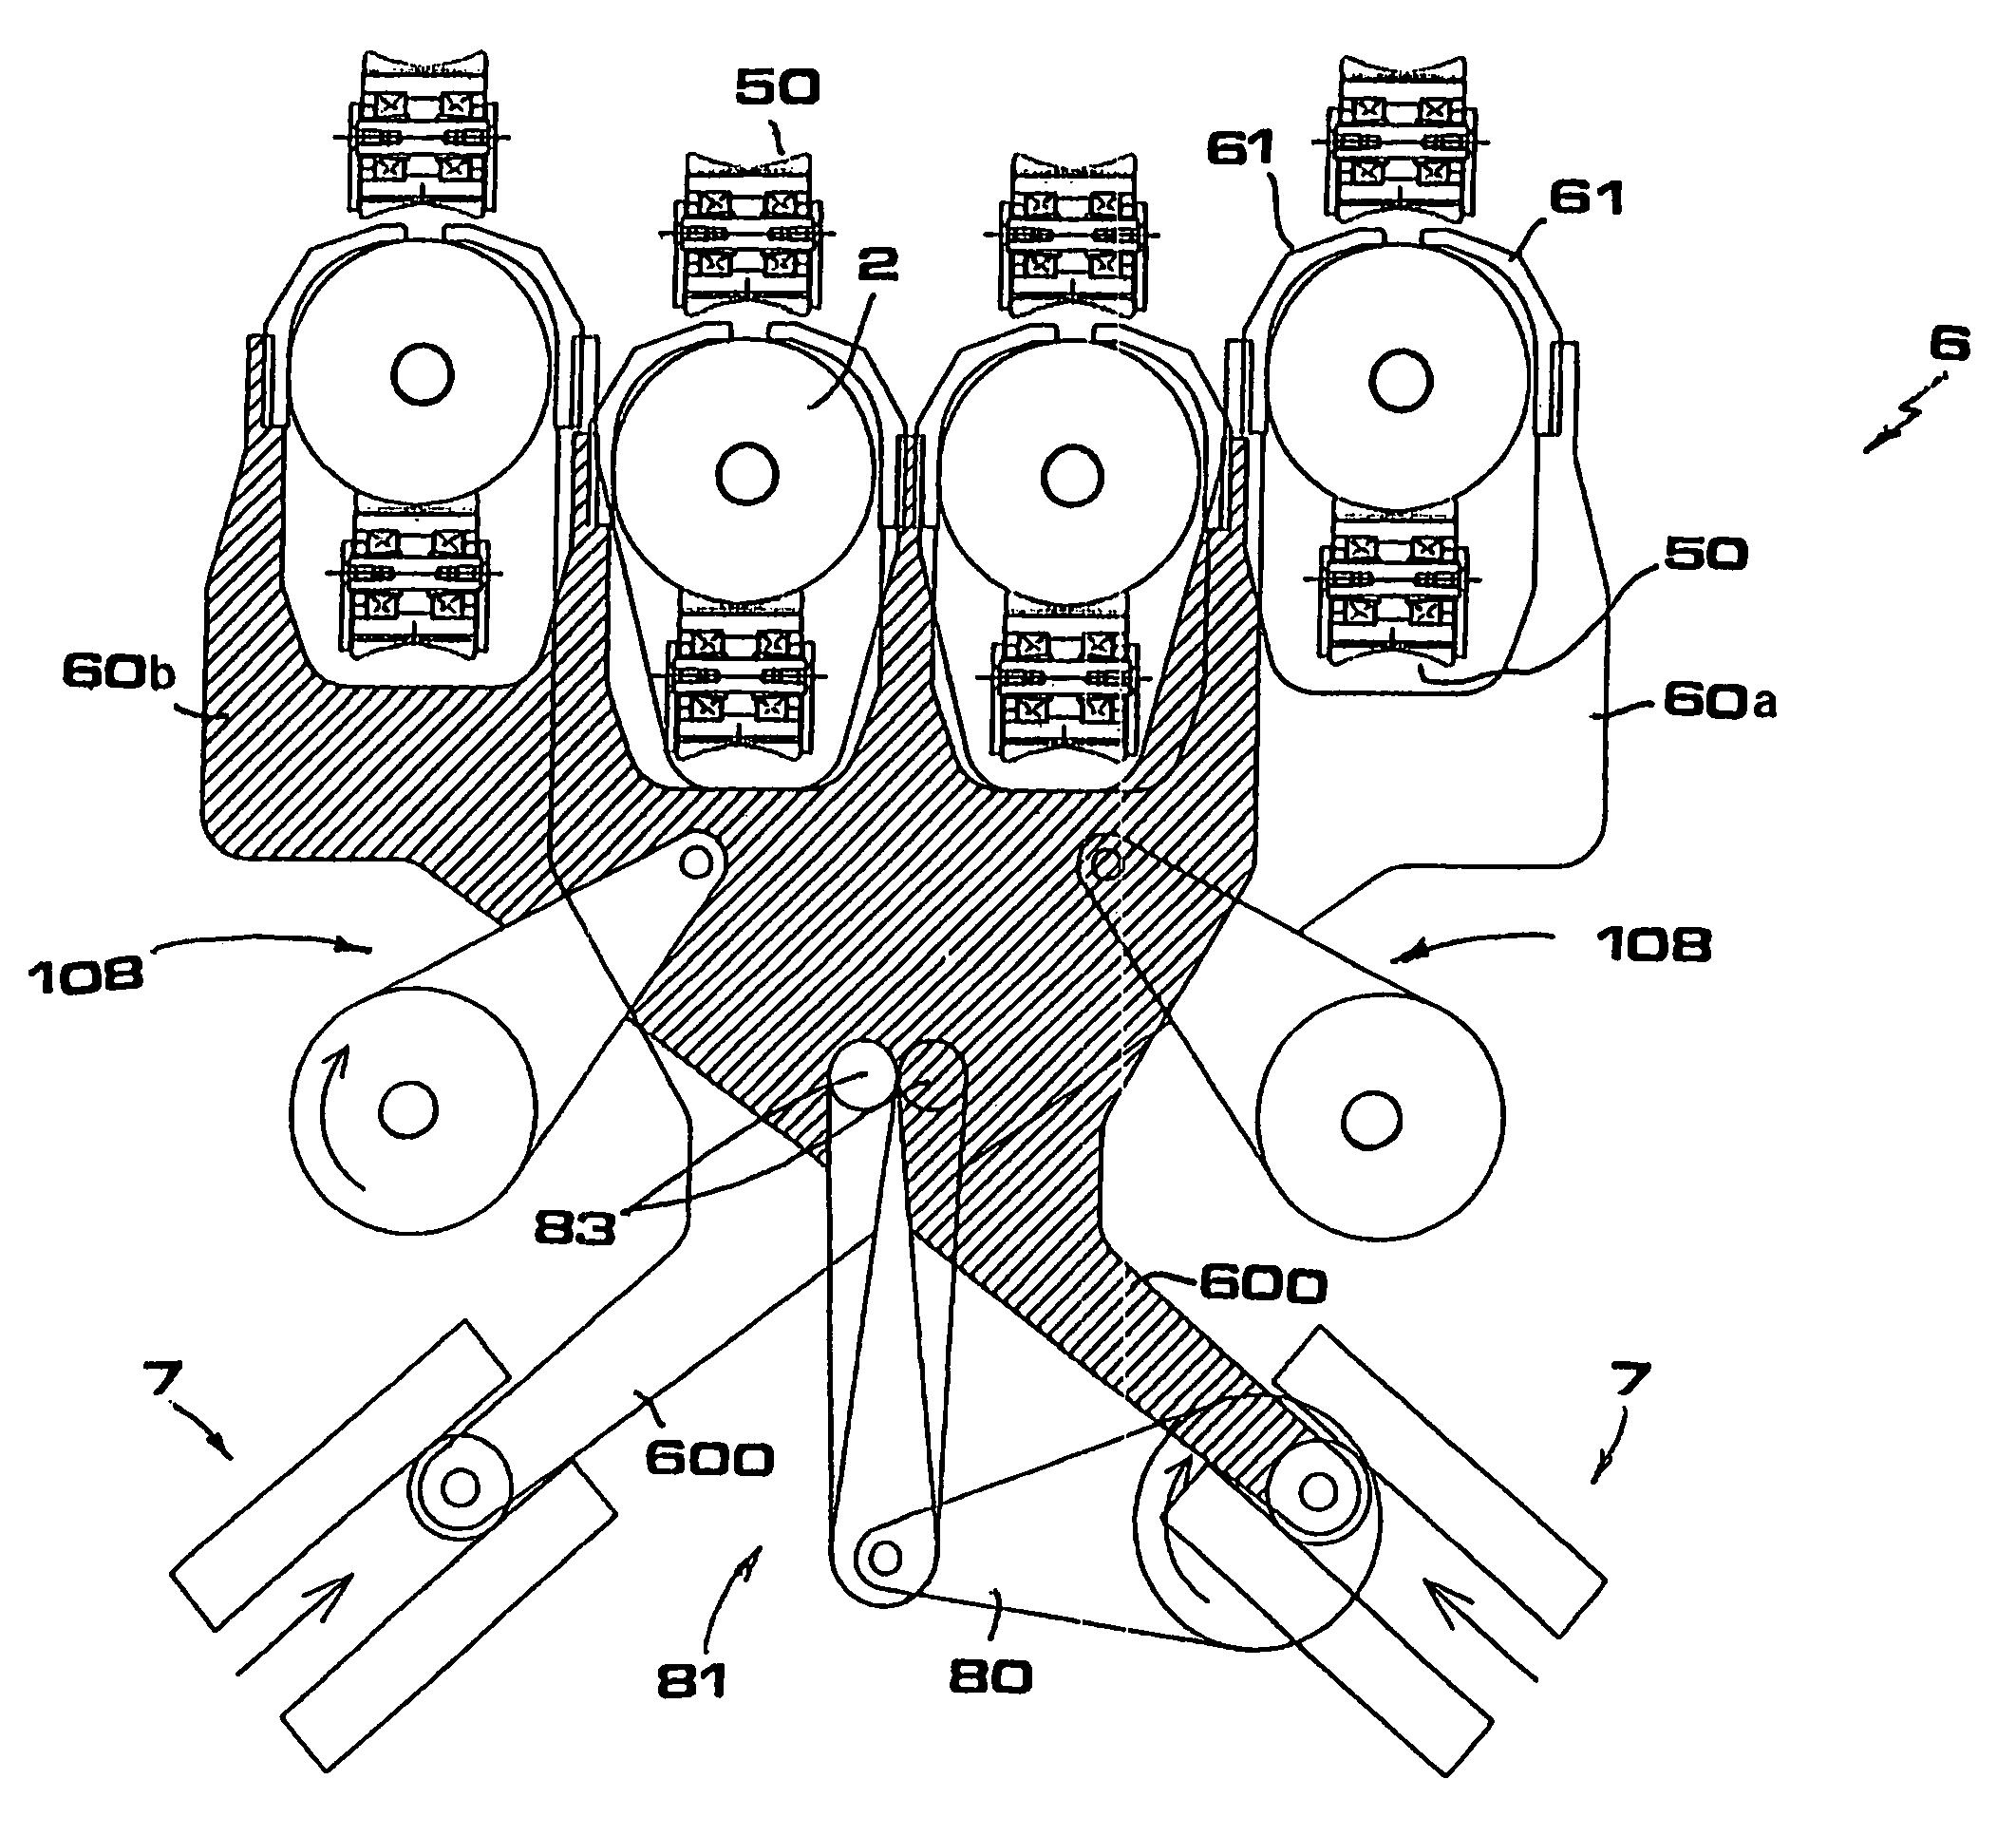 Apparatus for temporarily holding logs within cutting-off machines